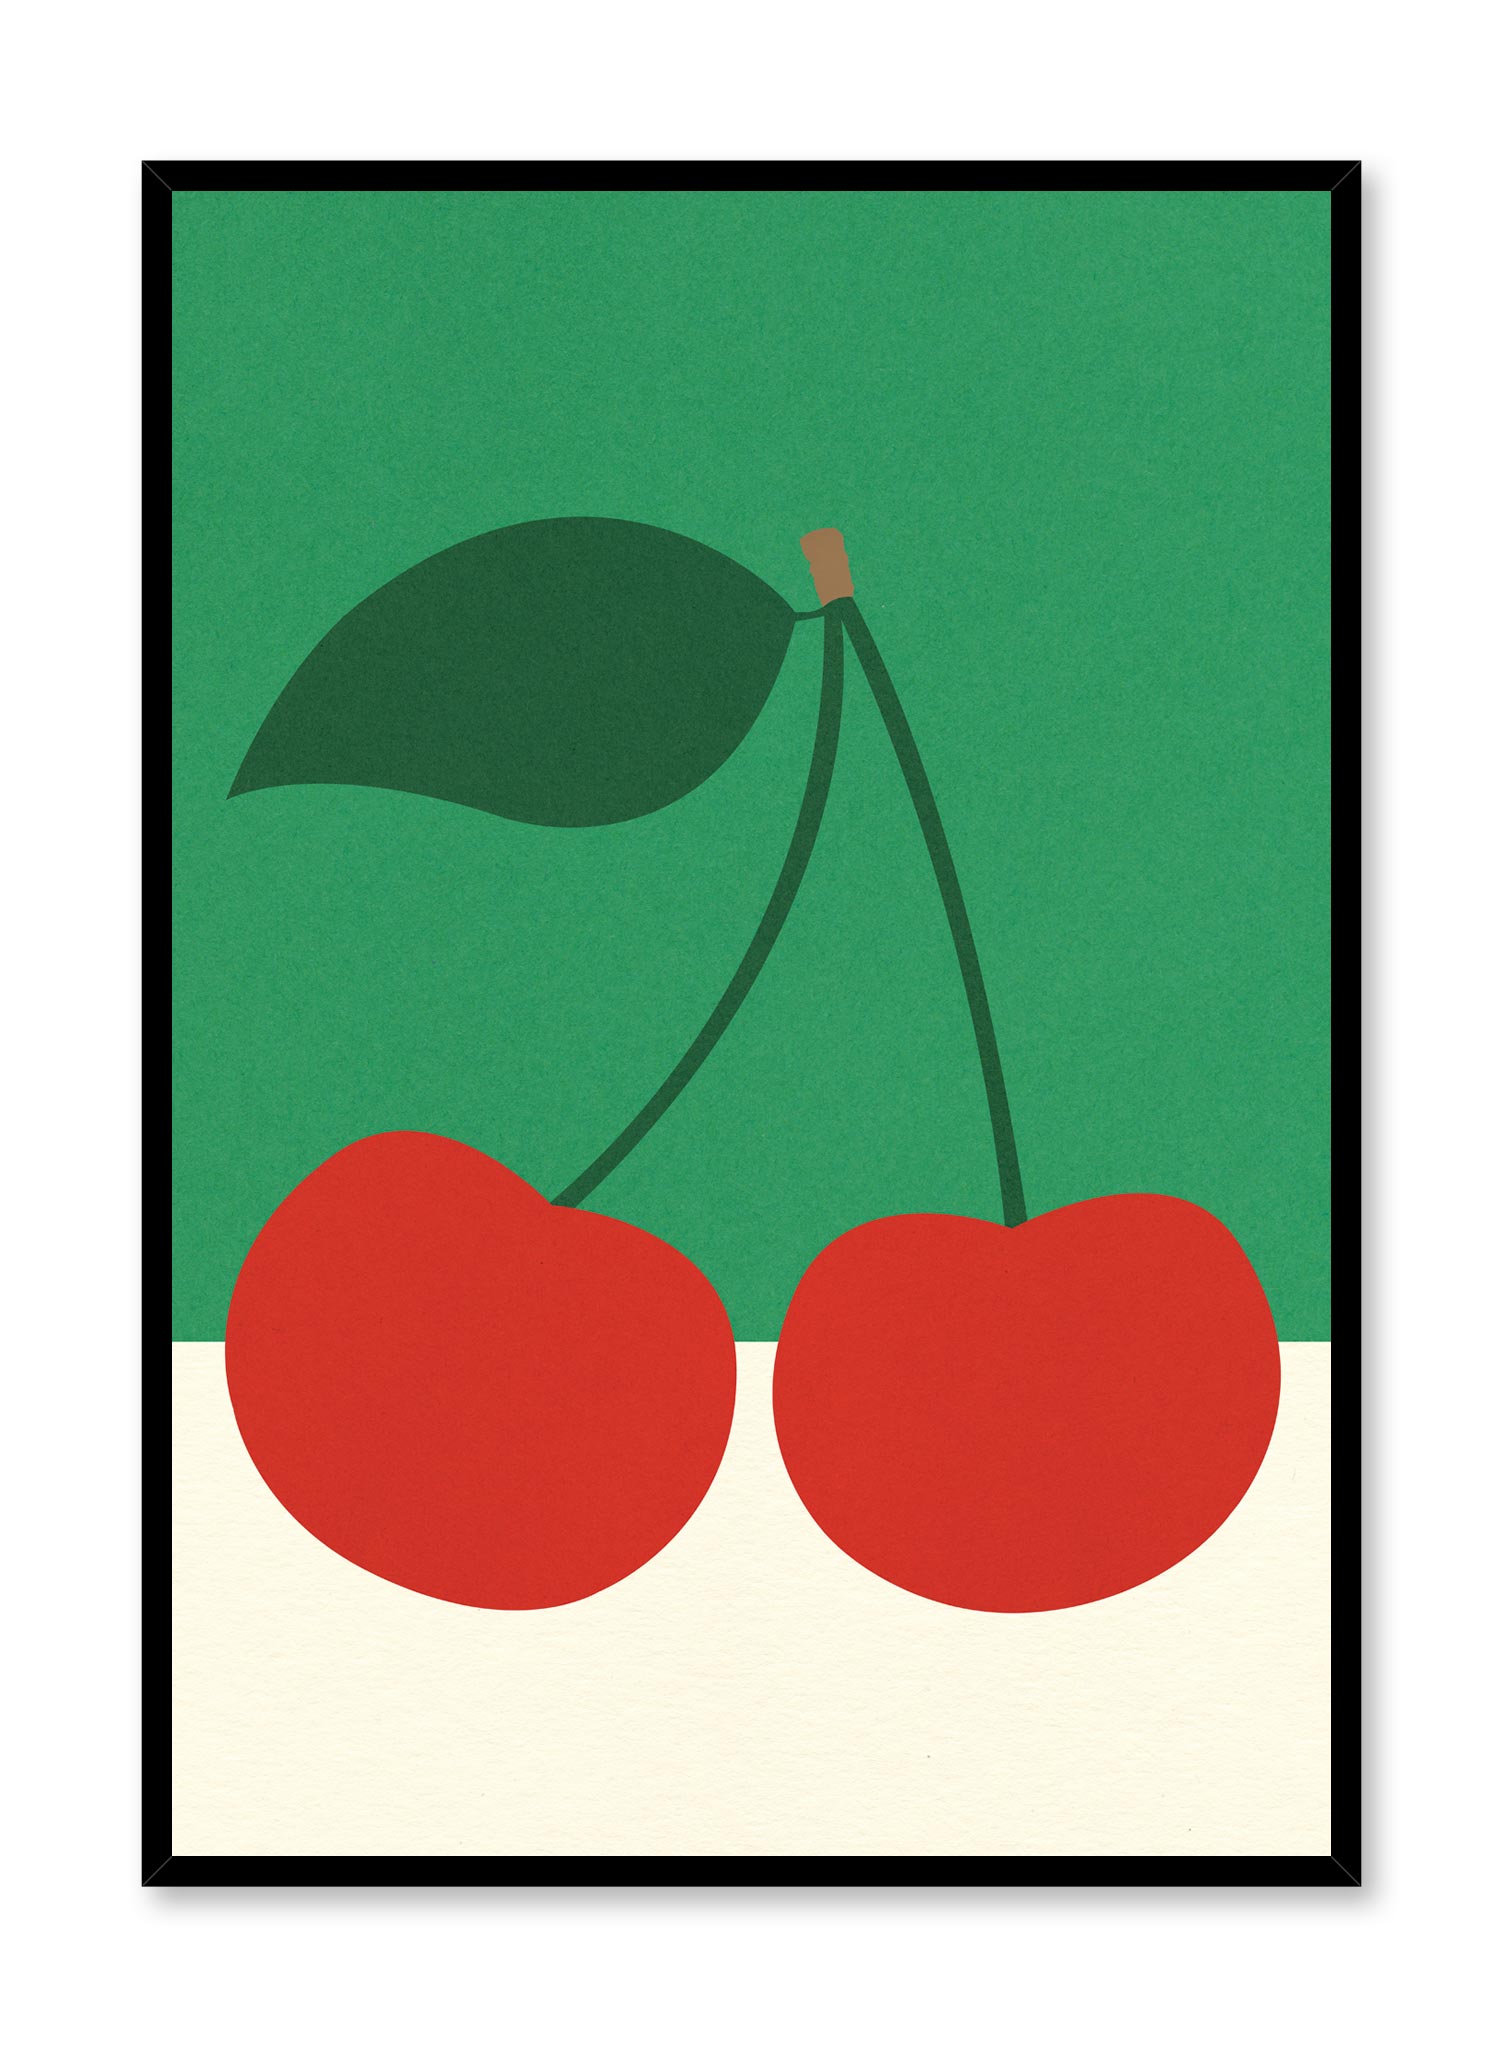 Modern minimalist poster by Opposite Wall with abstract collage illustration of cherries